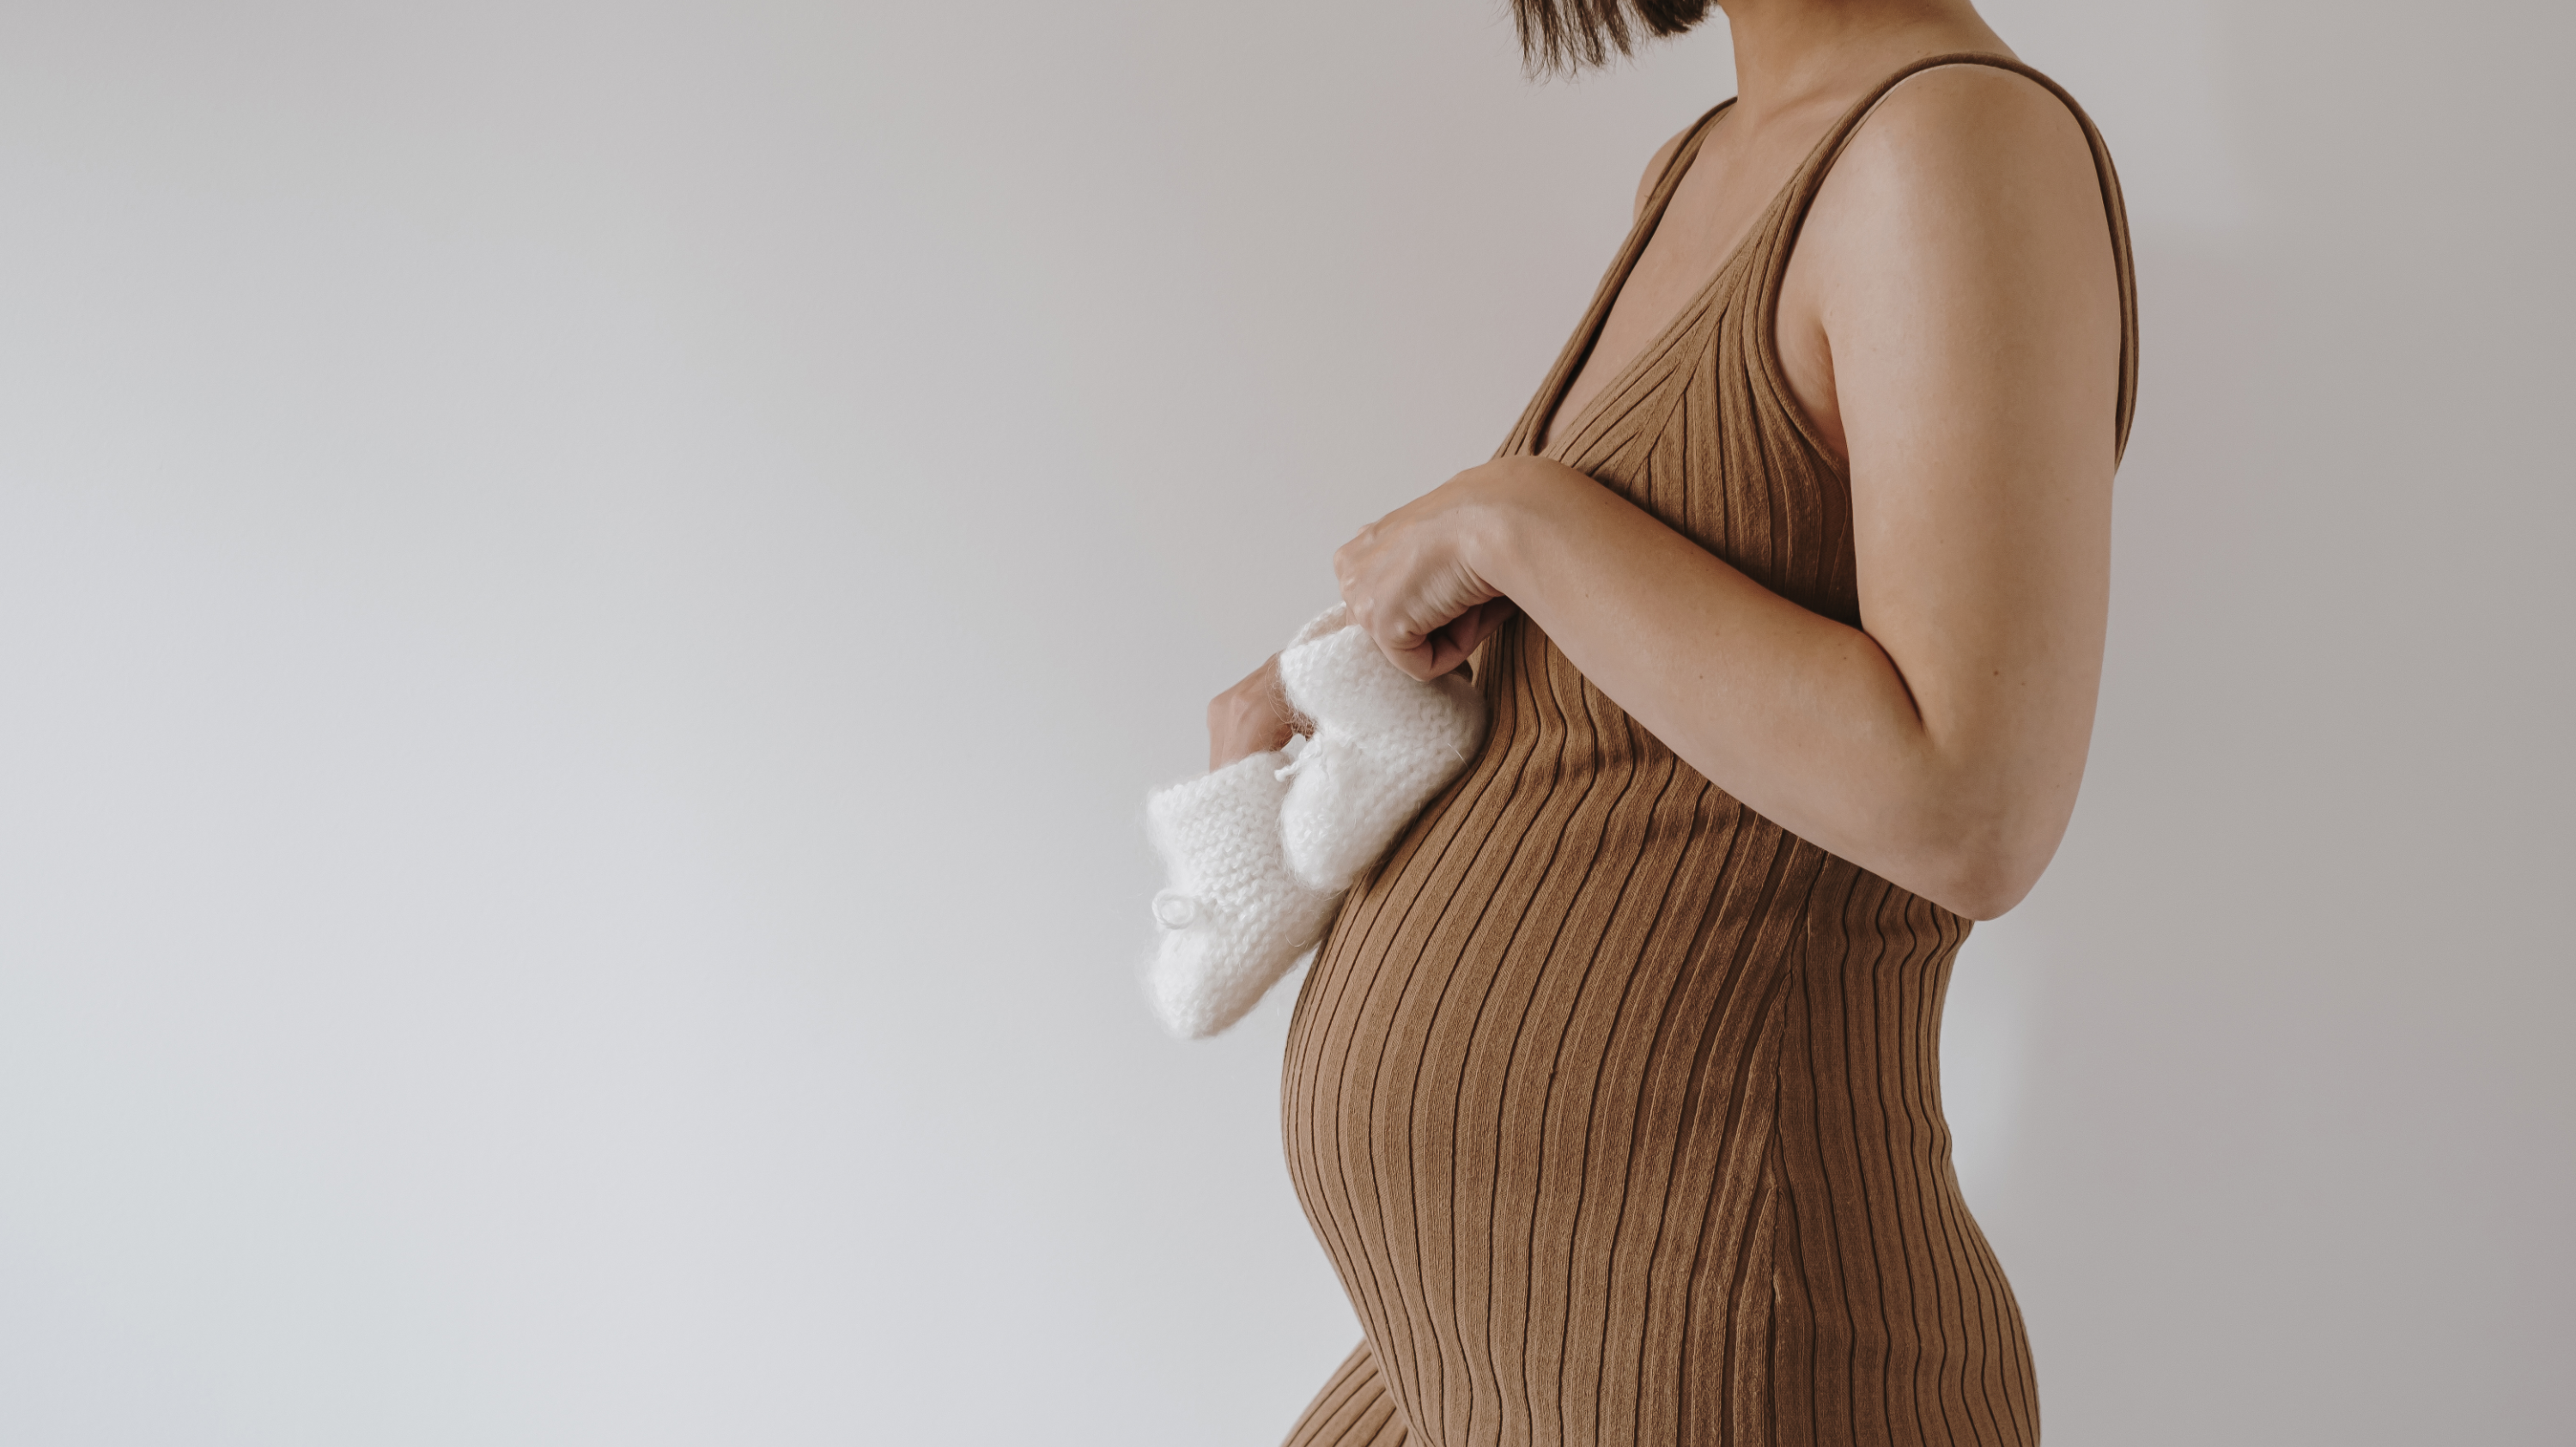 10 Chic Maternity Clothes You'll Love Wearing During Pregnancy